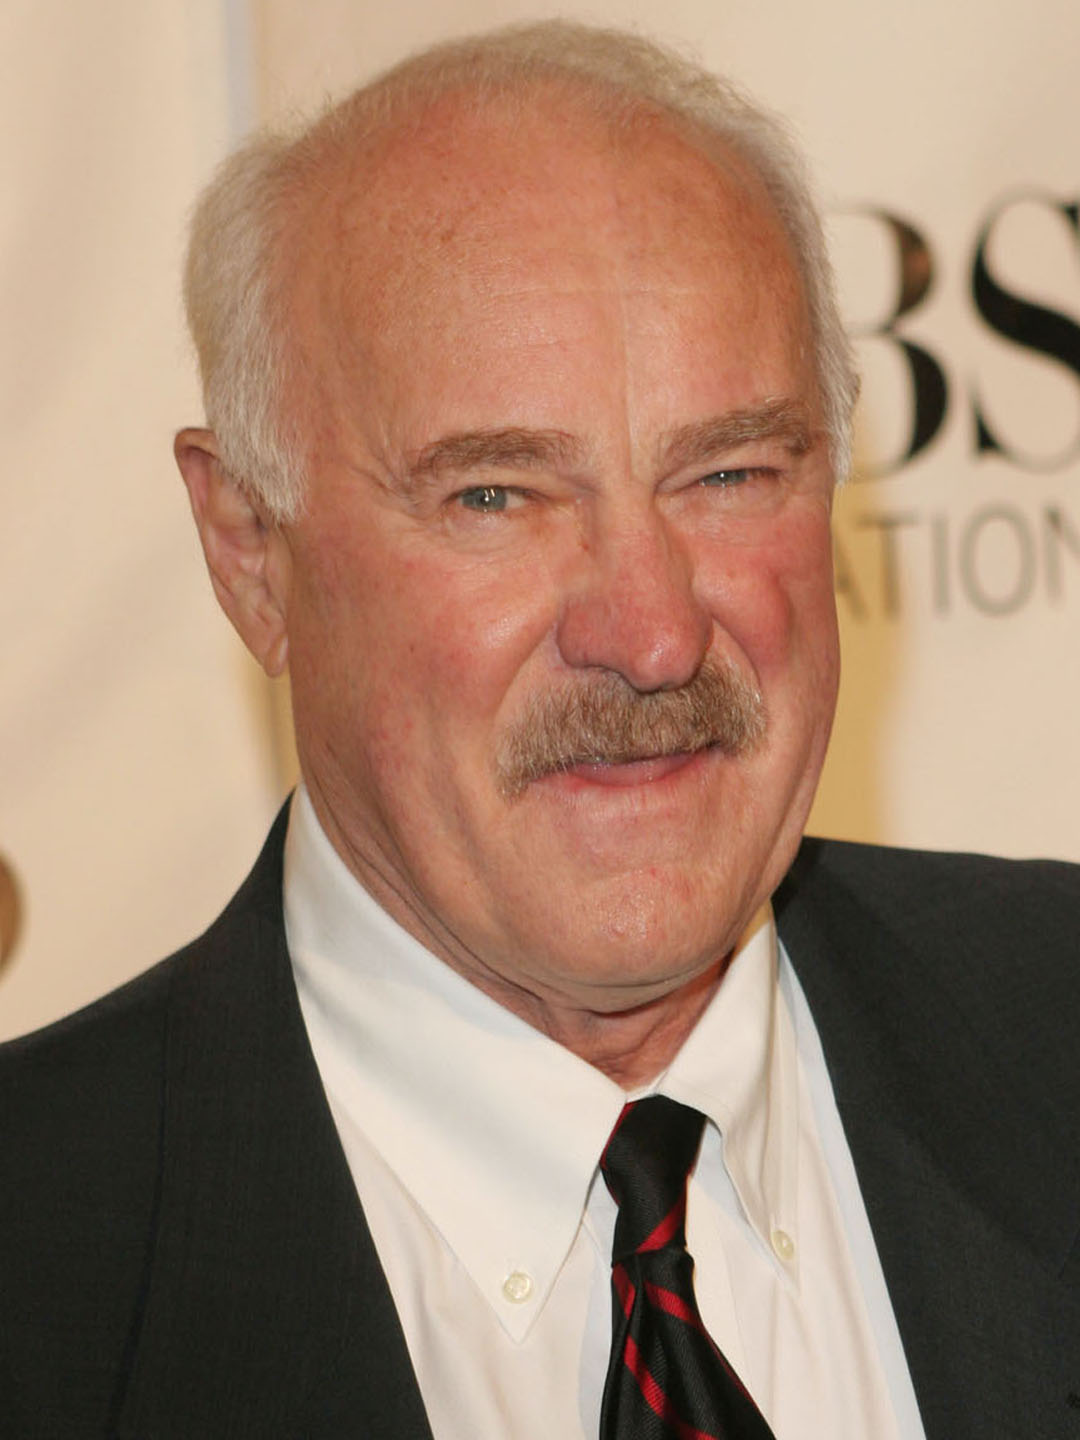 How tall is Dabney Coleman?